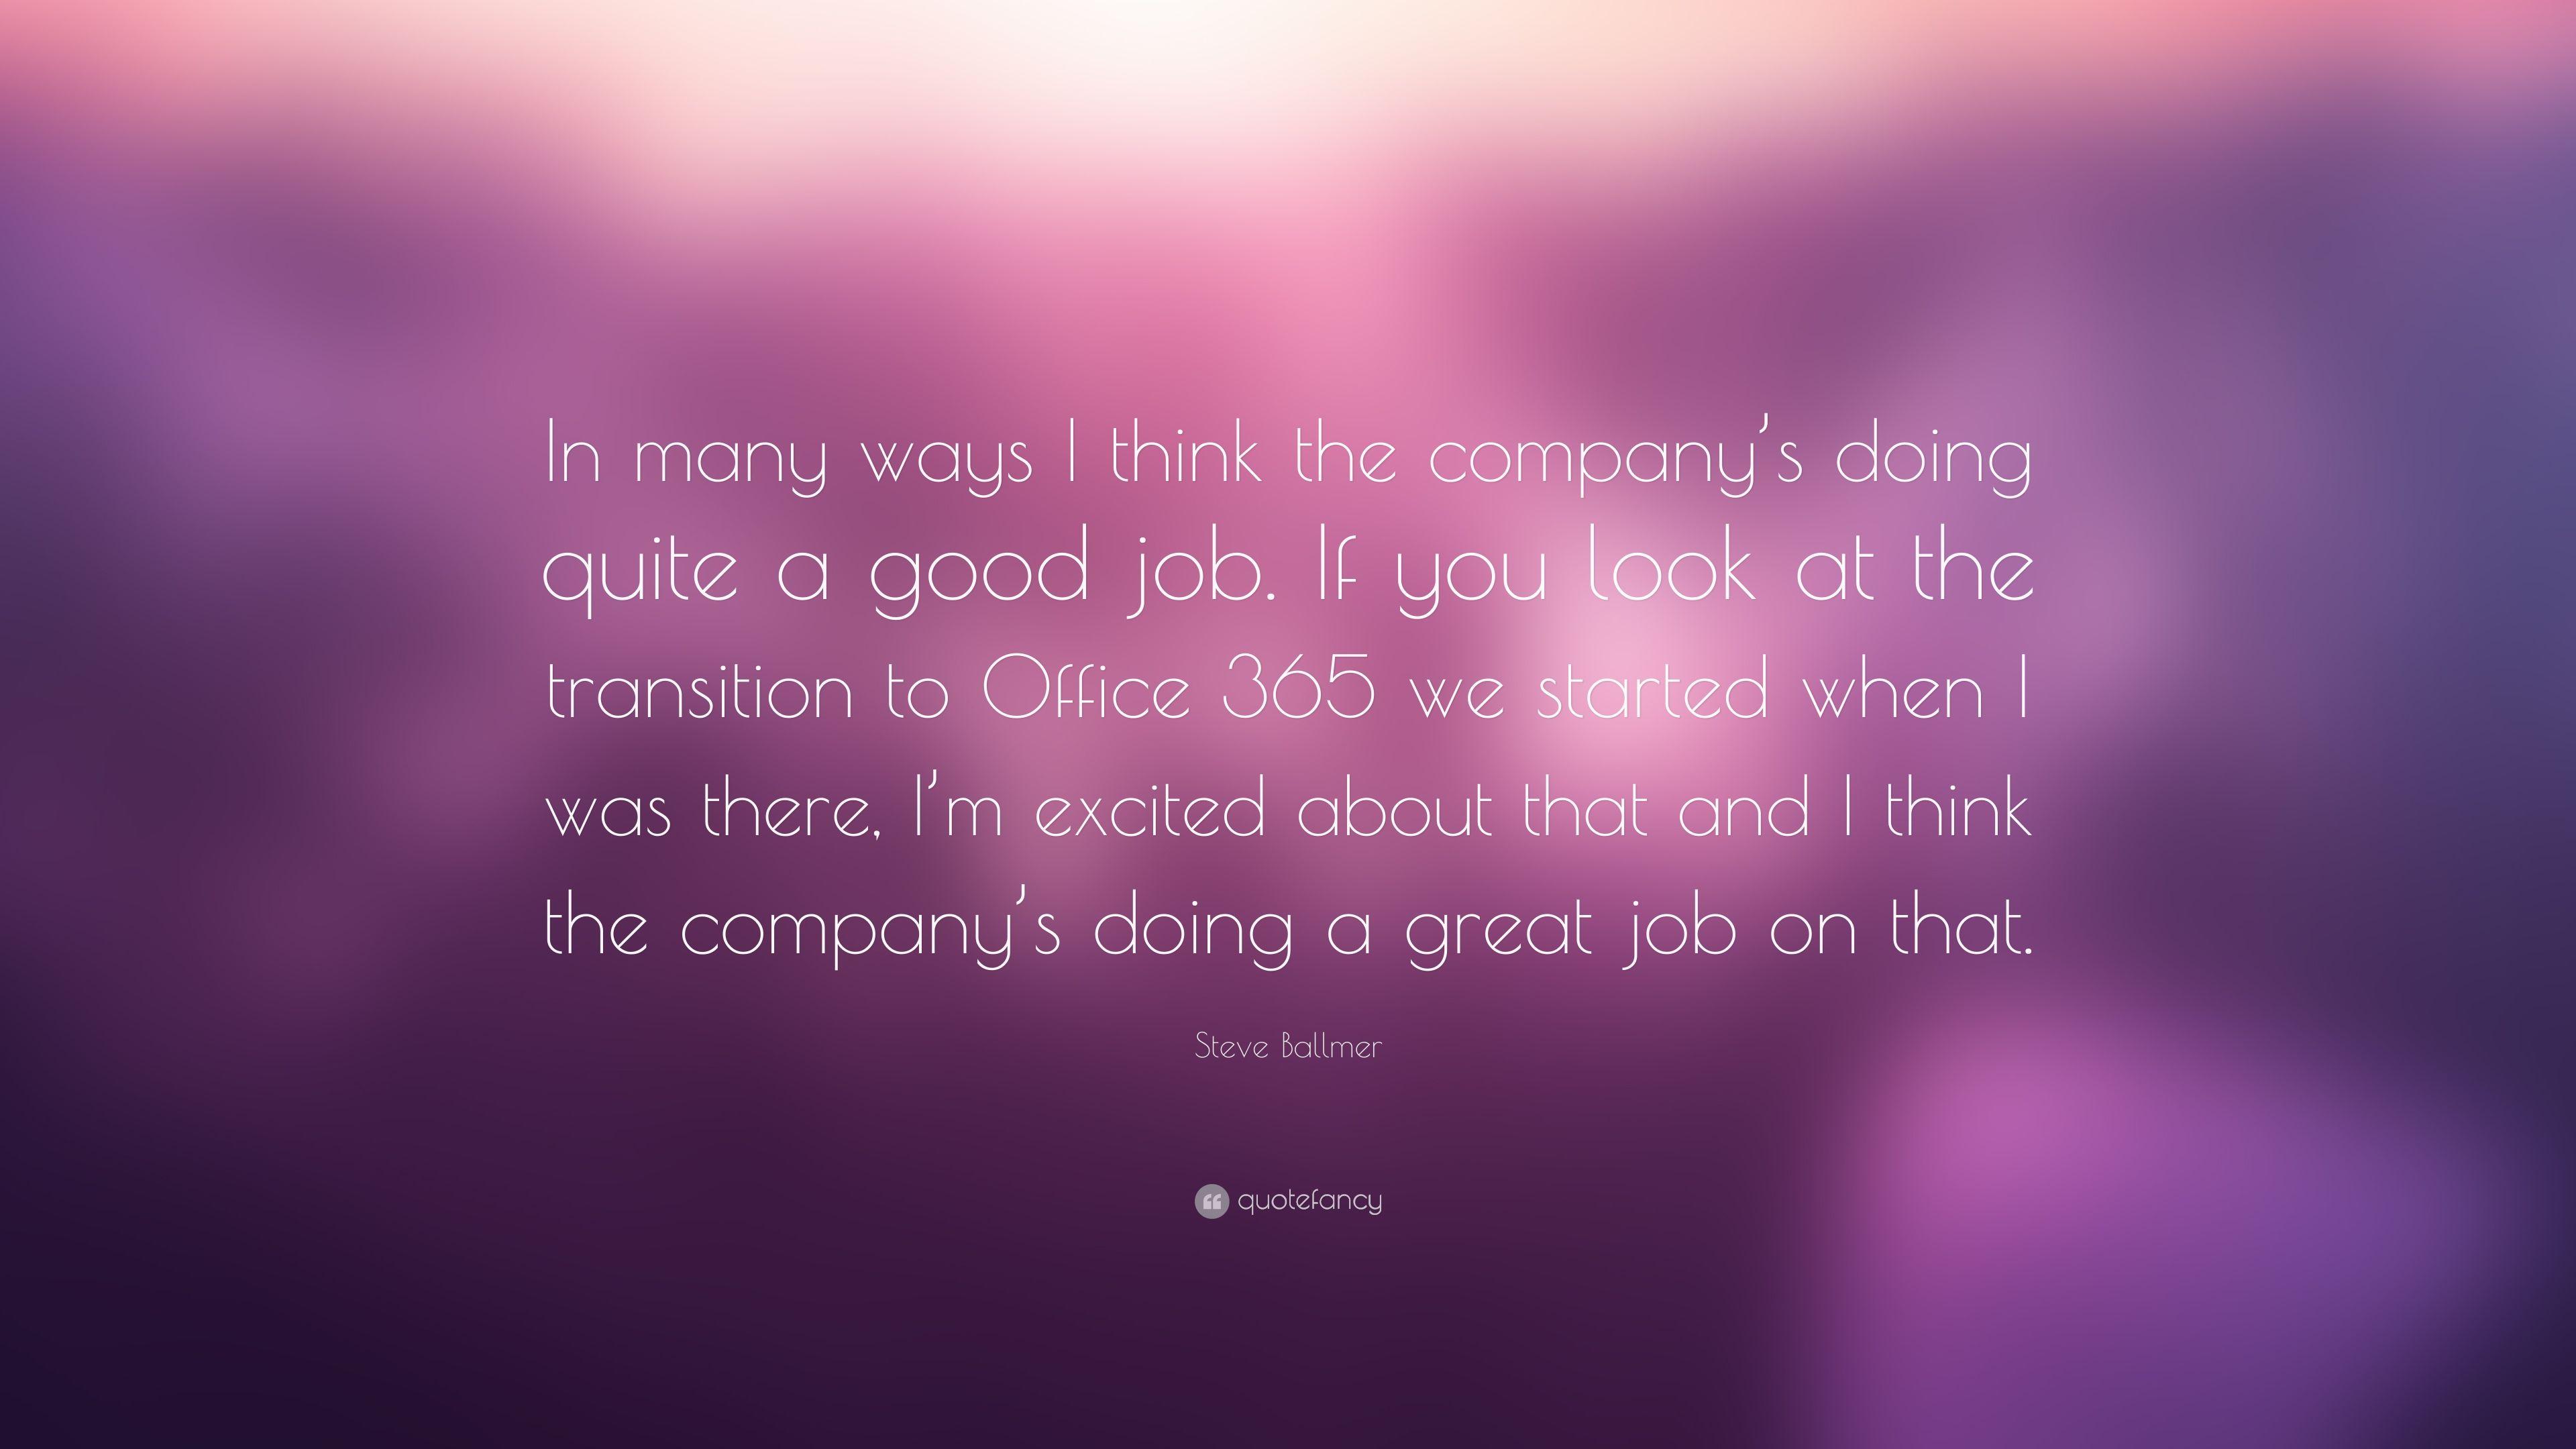 Steve Ballmer Quote: “In many ways I think the company's doing quite